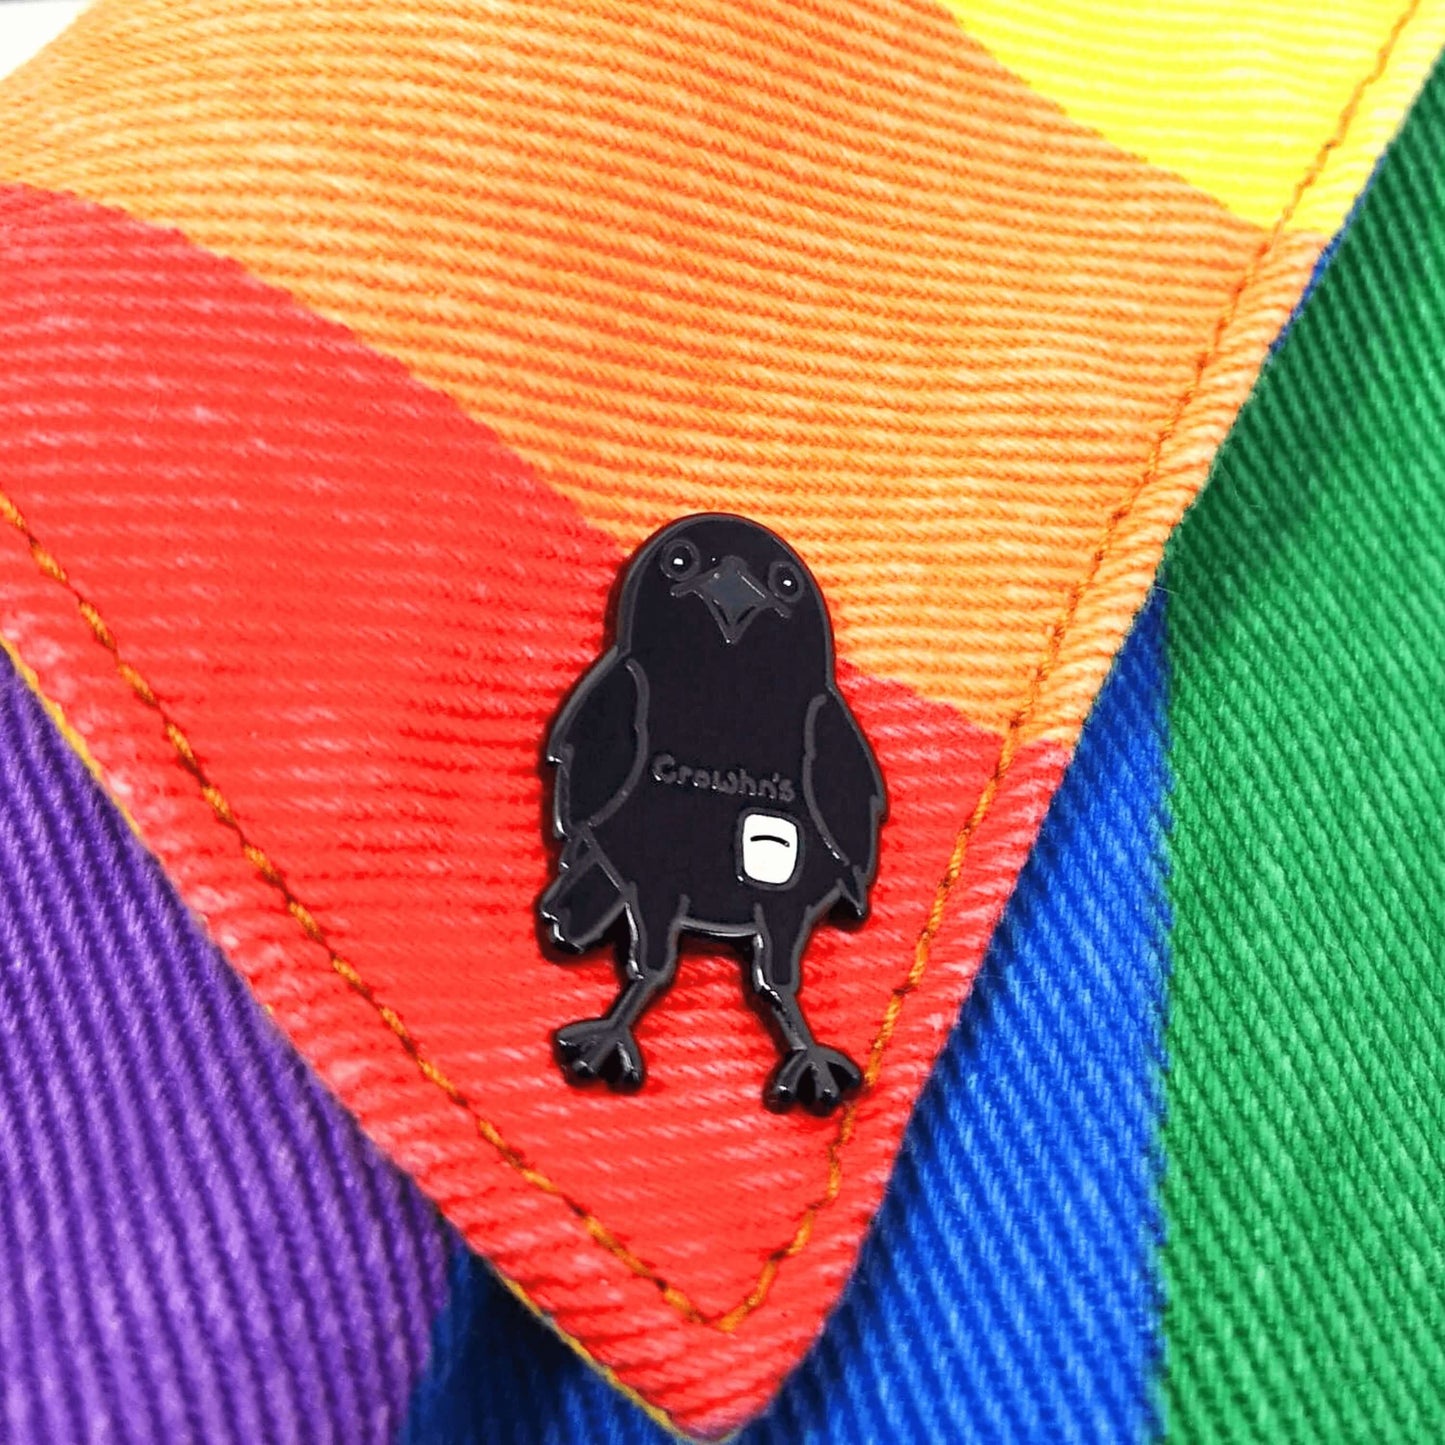 The Crowhn's Disease Enamel Pin - Crohn's Disease on a rainbow denim jacket collar. The black crow shape pin has a white stoma bag fitted and the text reading 'chrowhn's' across its chest. The design is raising awareness for crohn's disease.